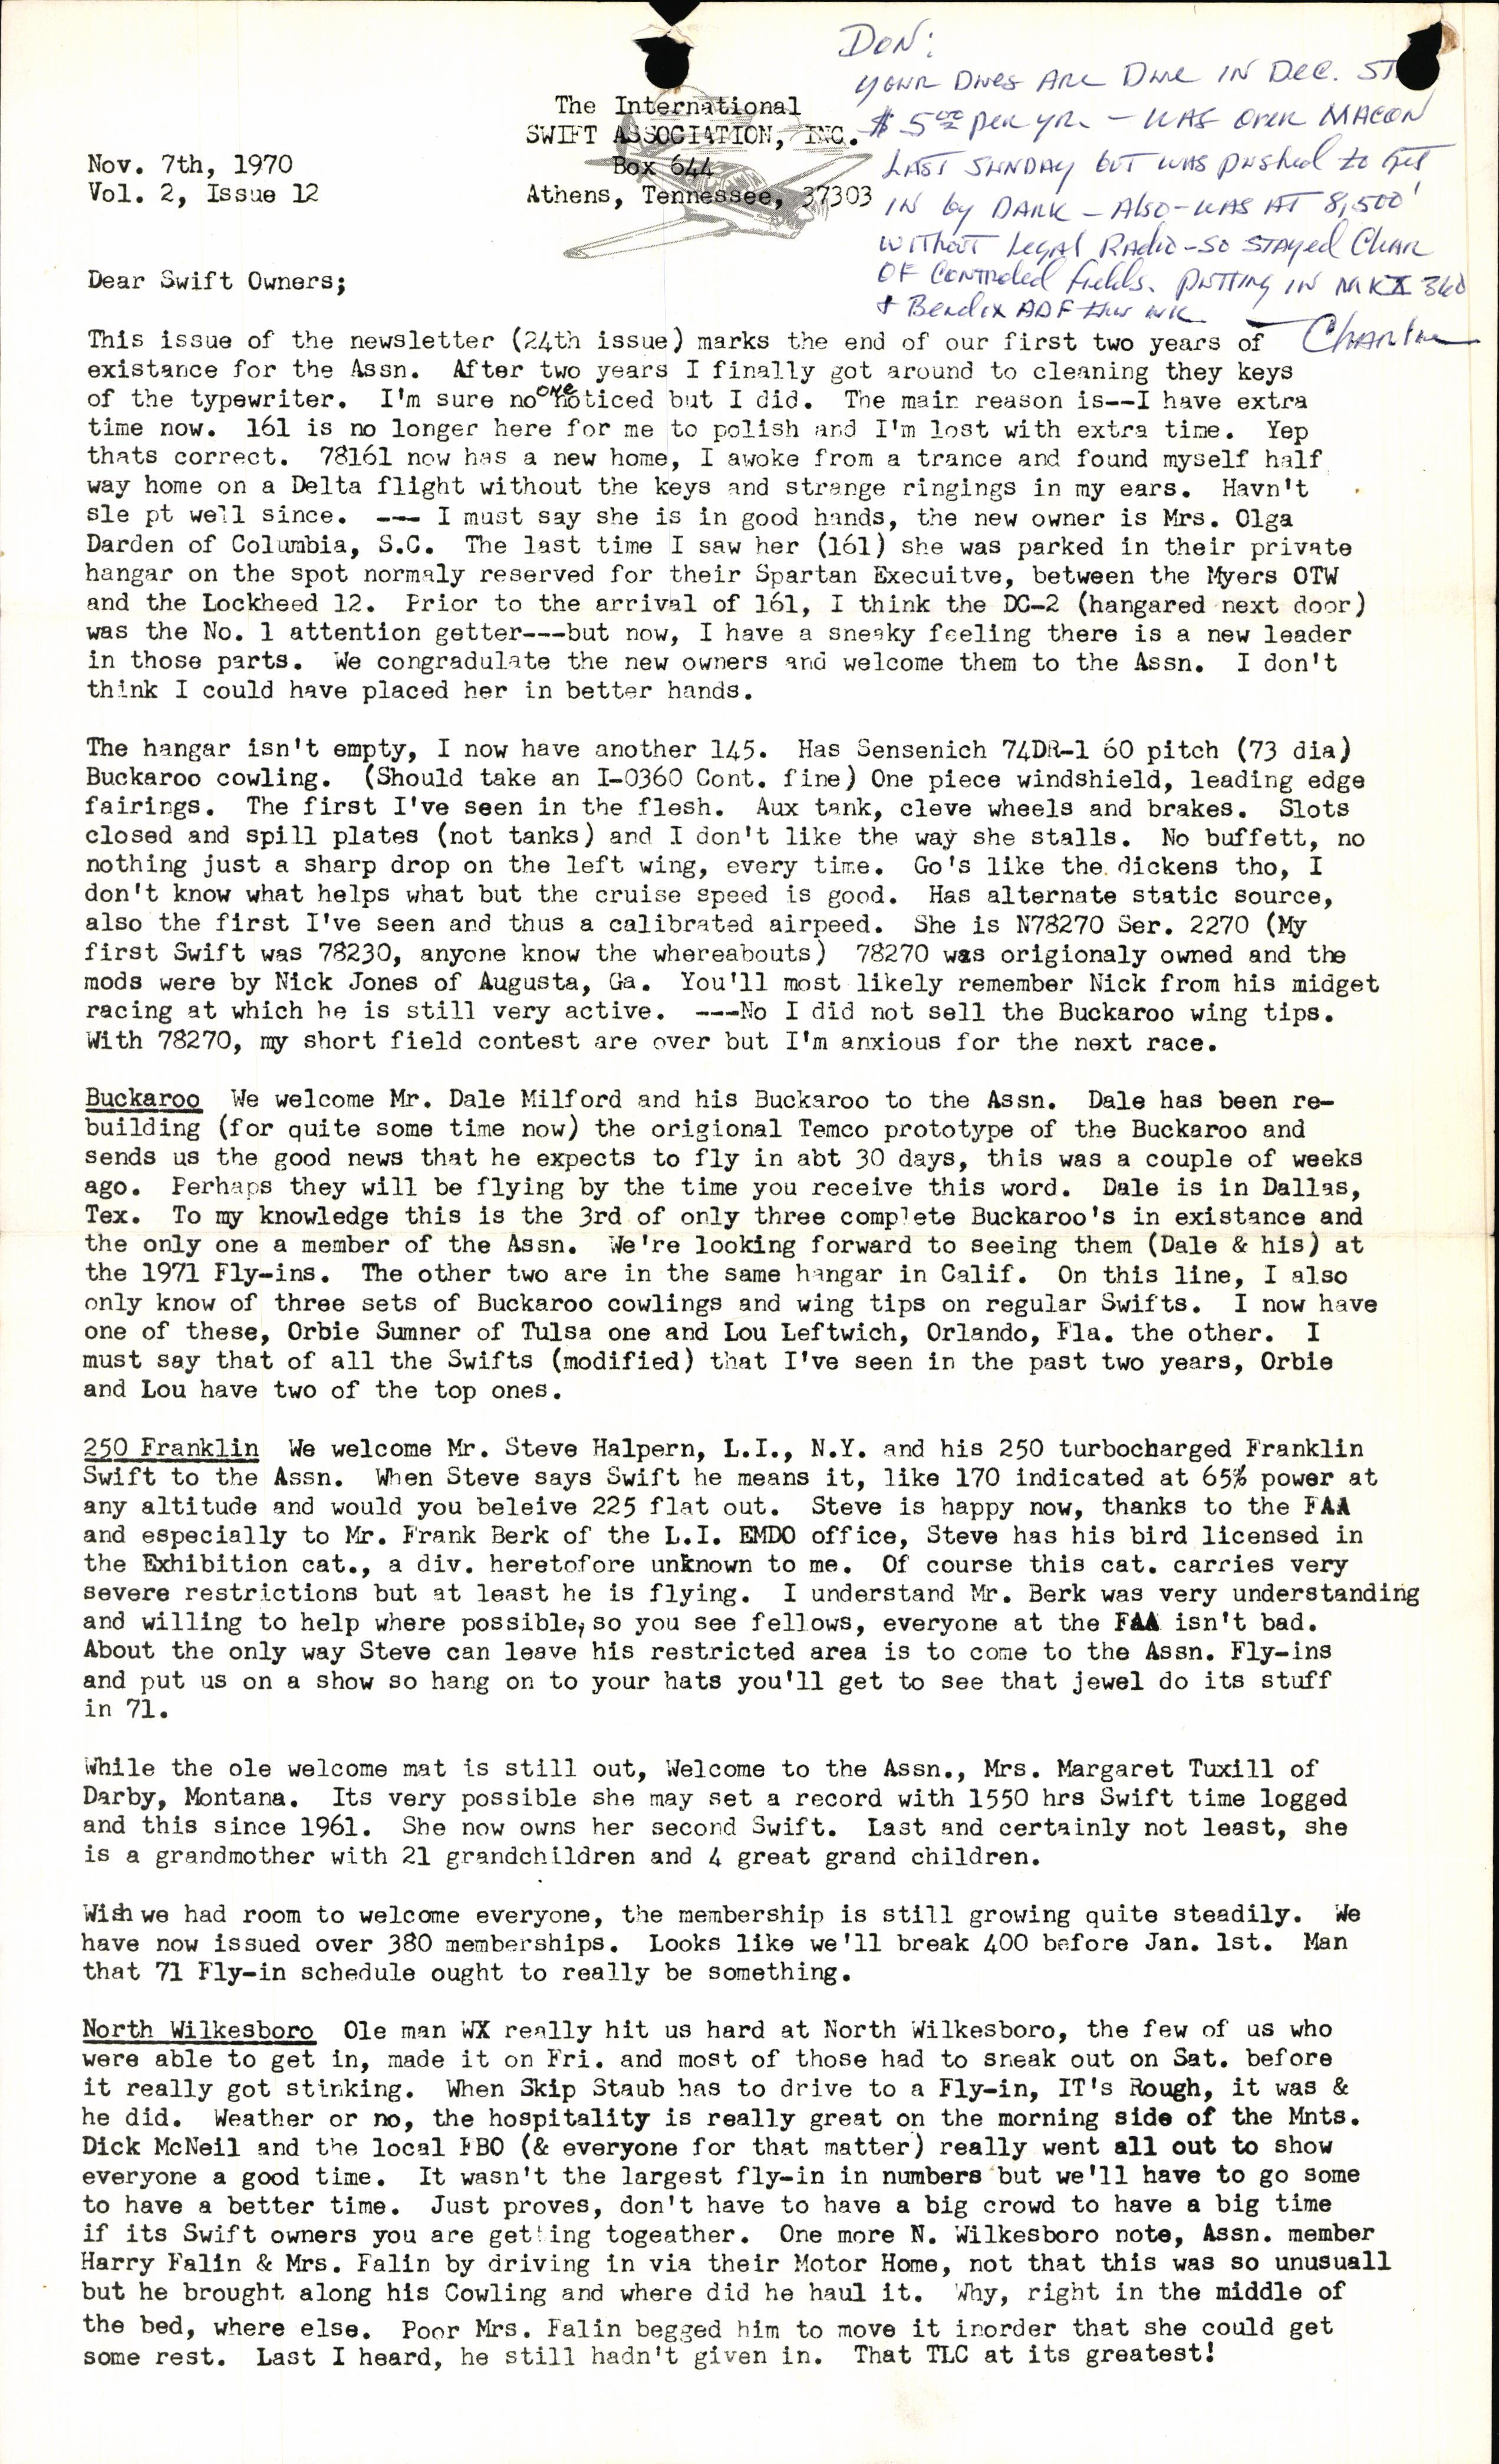 Sample page 1 from AirCorps Library document: November 1970